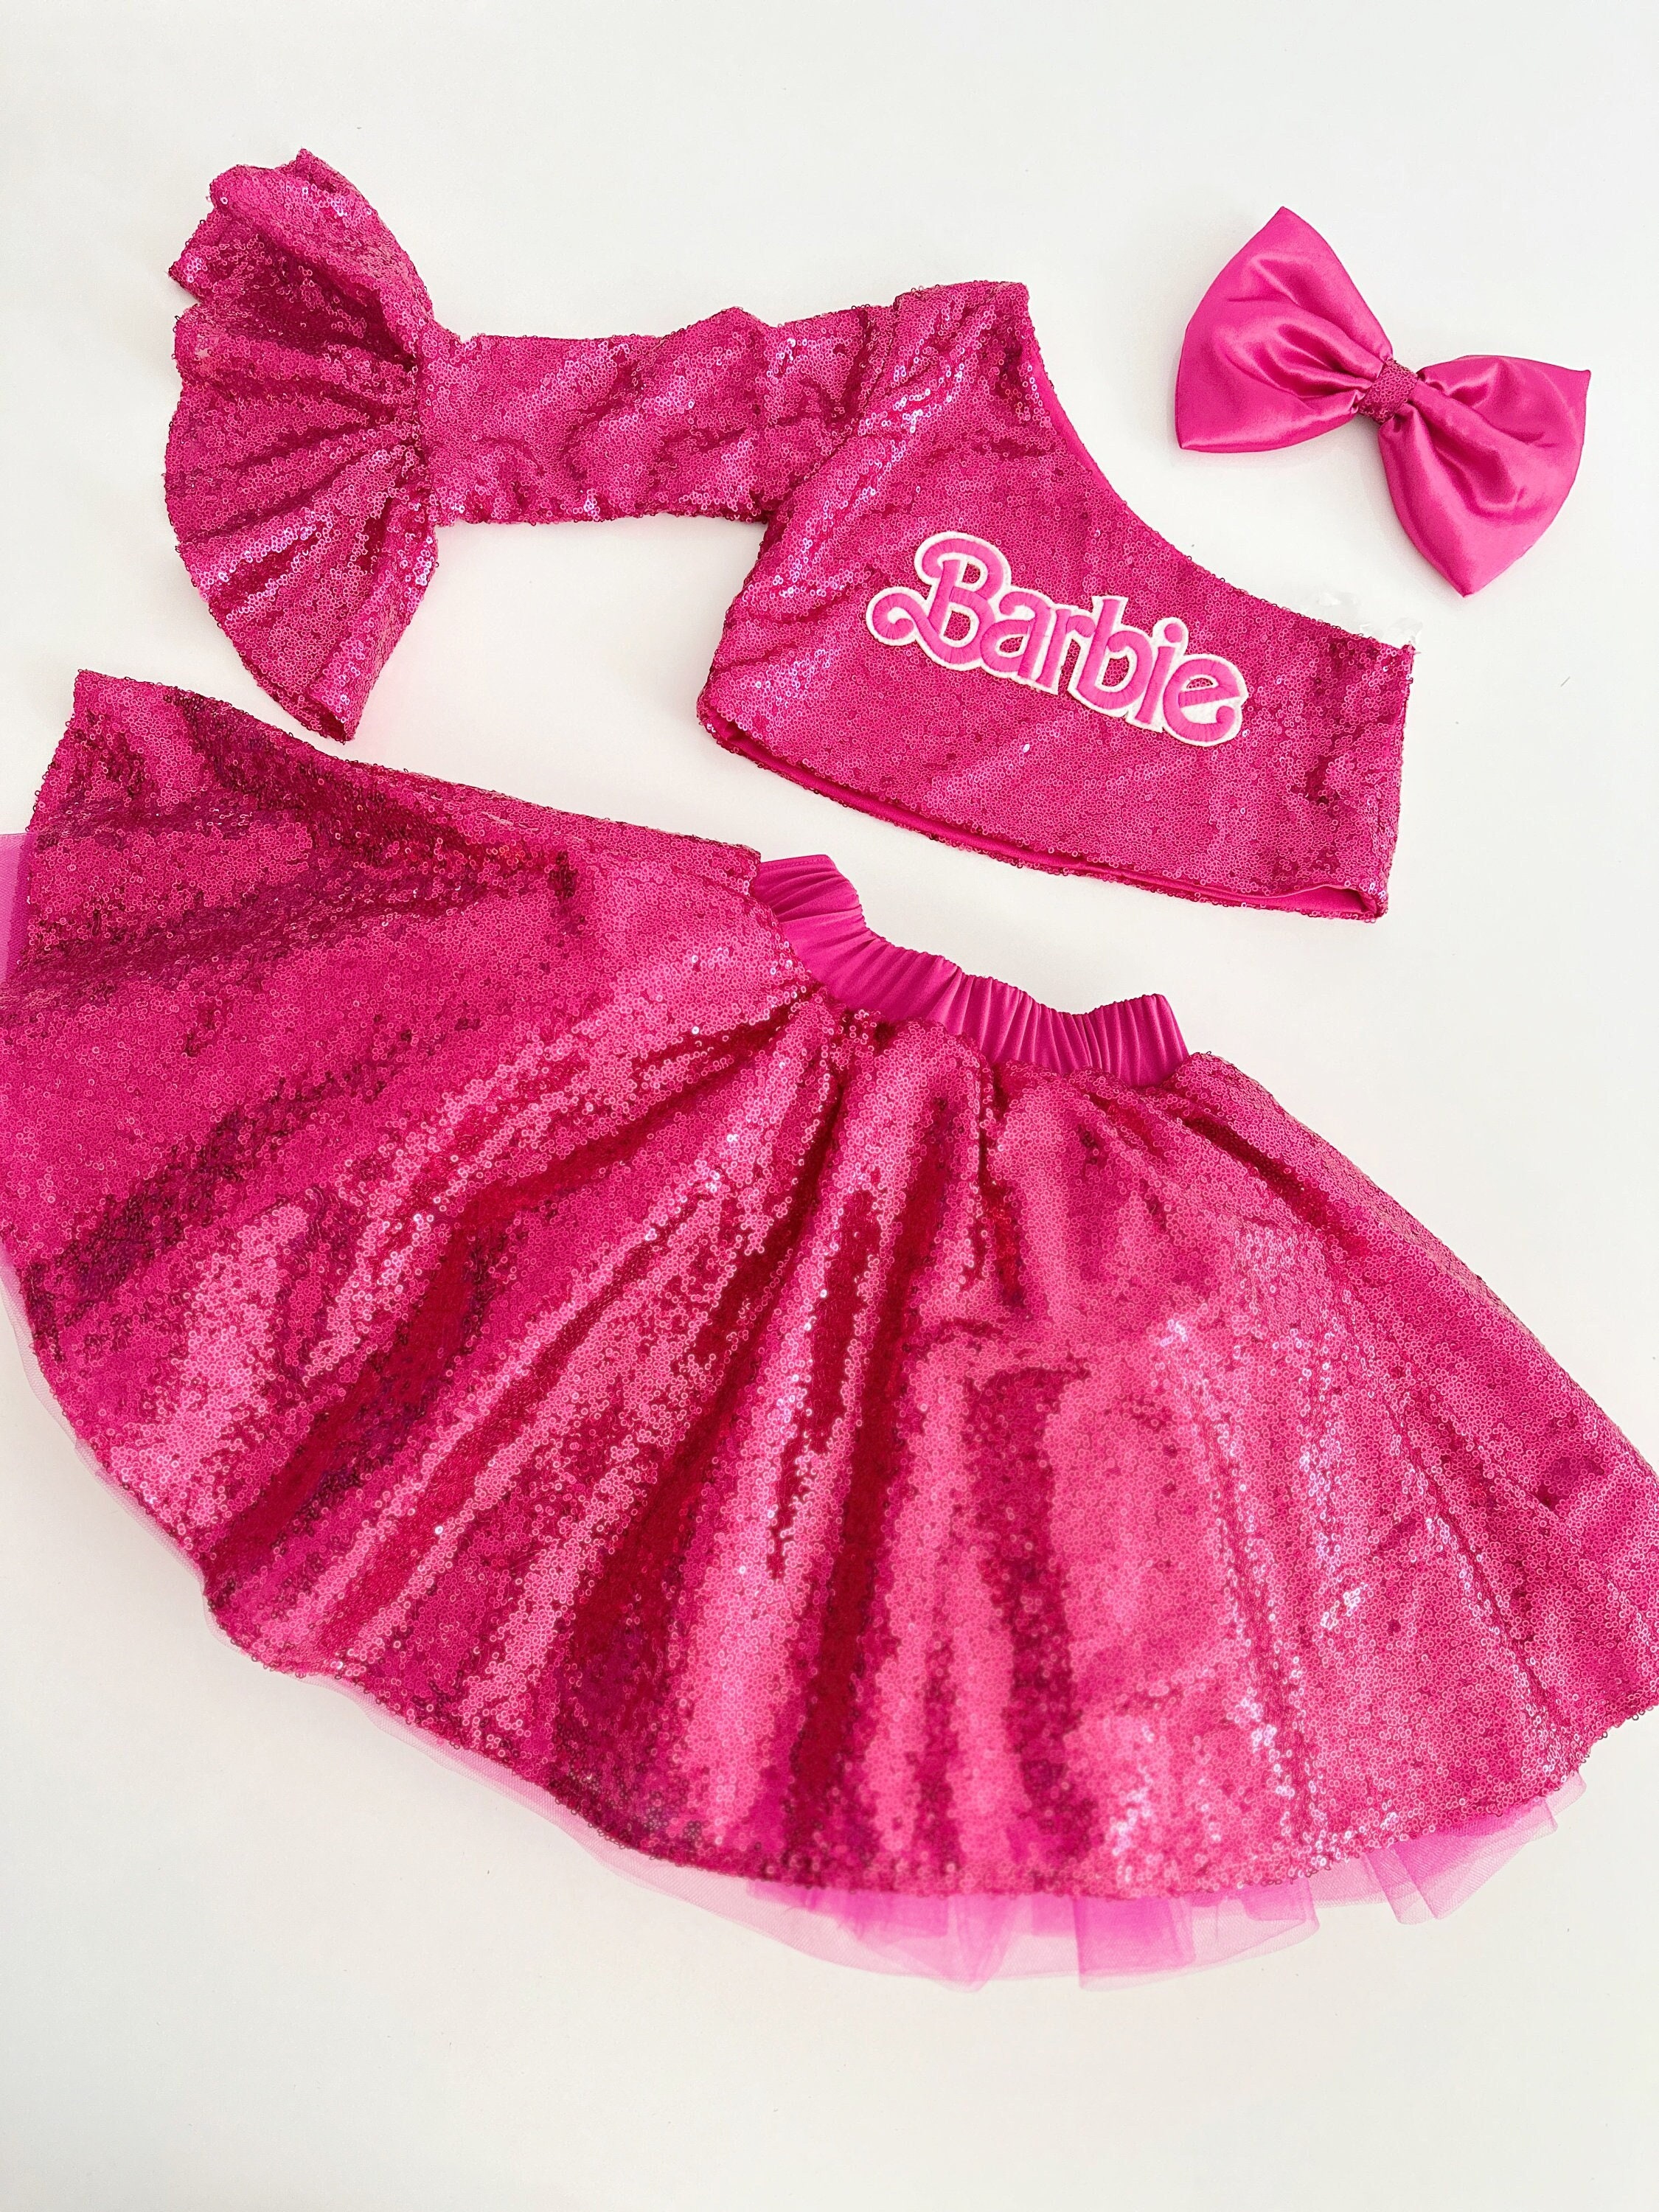 Barbie birthday outfit for girls -  Italia